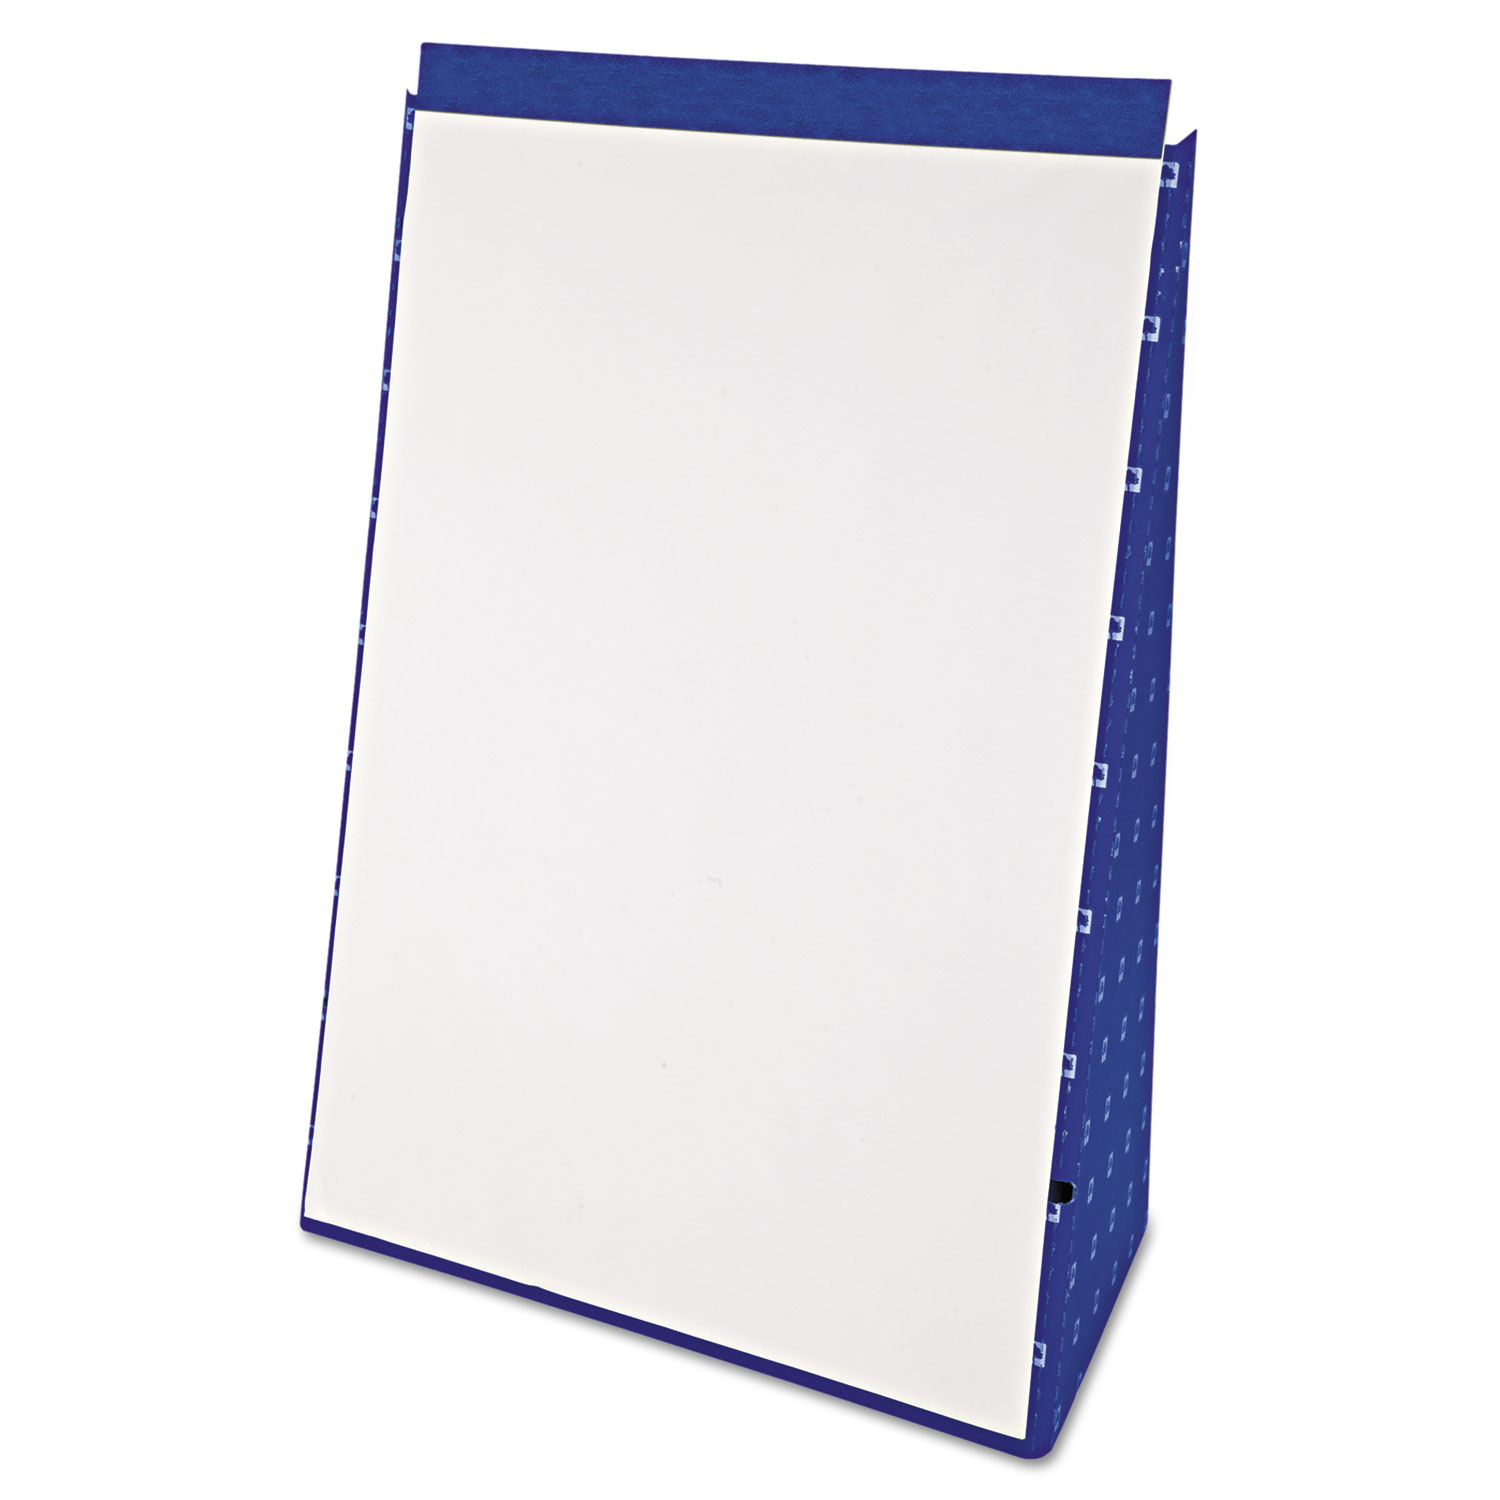  Ampad 24-022 Tabletop Flip Chart, 20 x 28, White, 20 Sheets (TOP24022) 